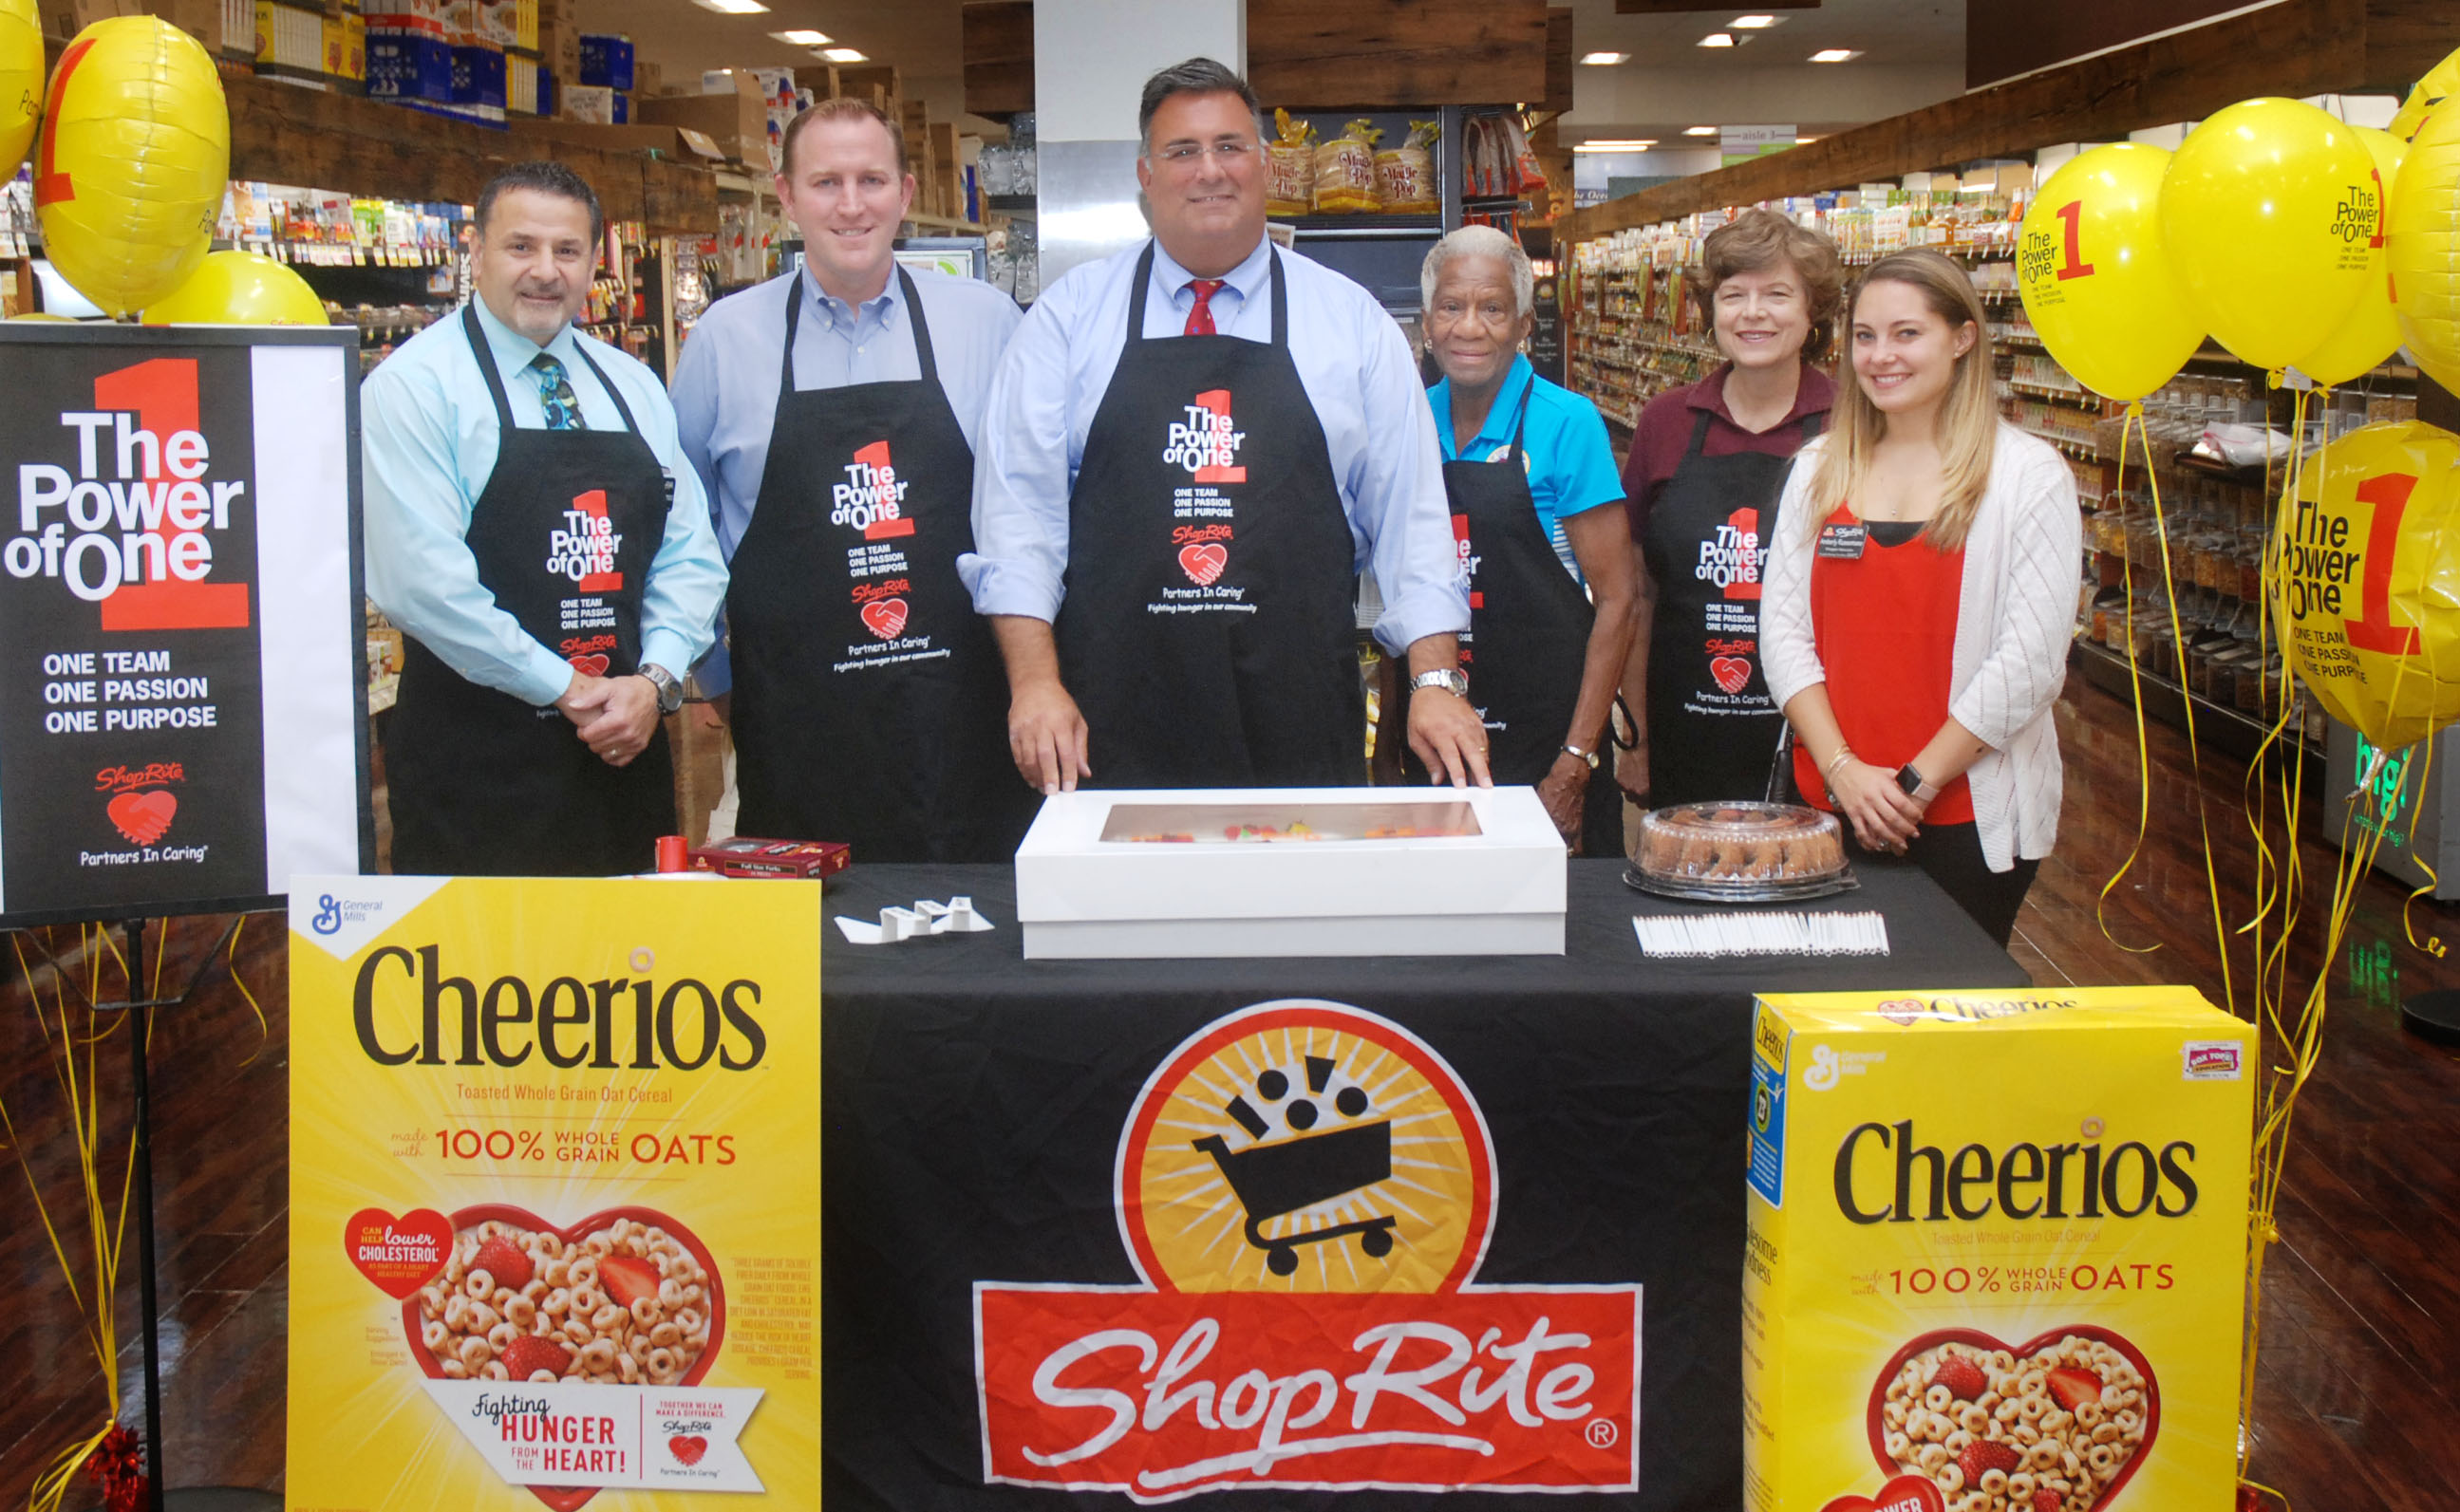 Helping “Bag Shoprite in Clark – County of